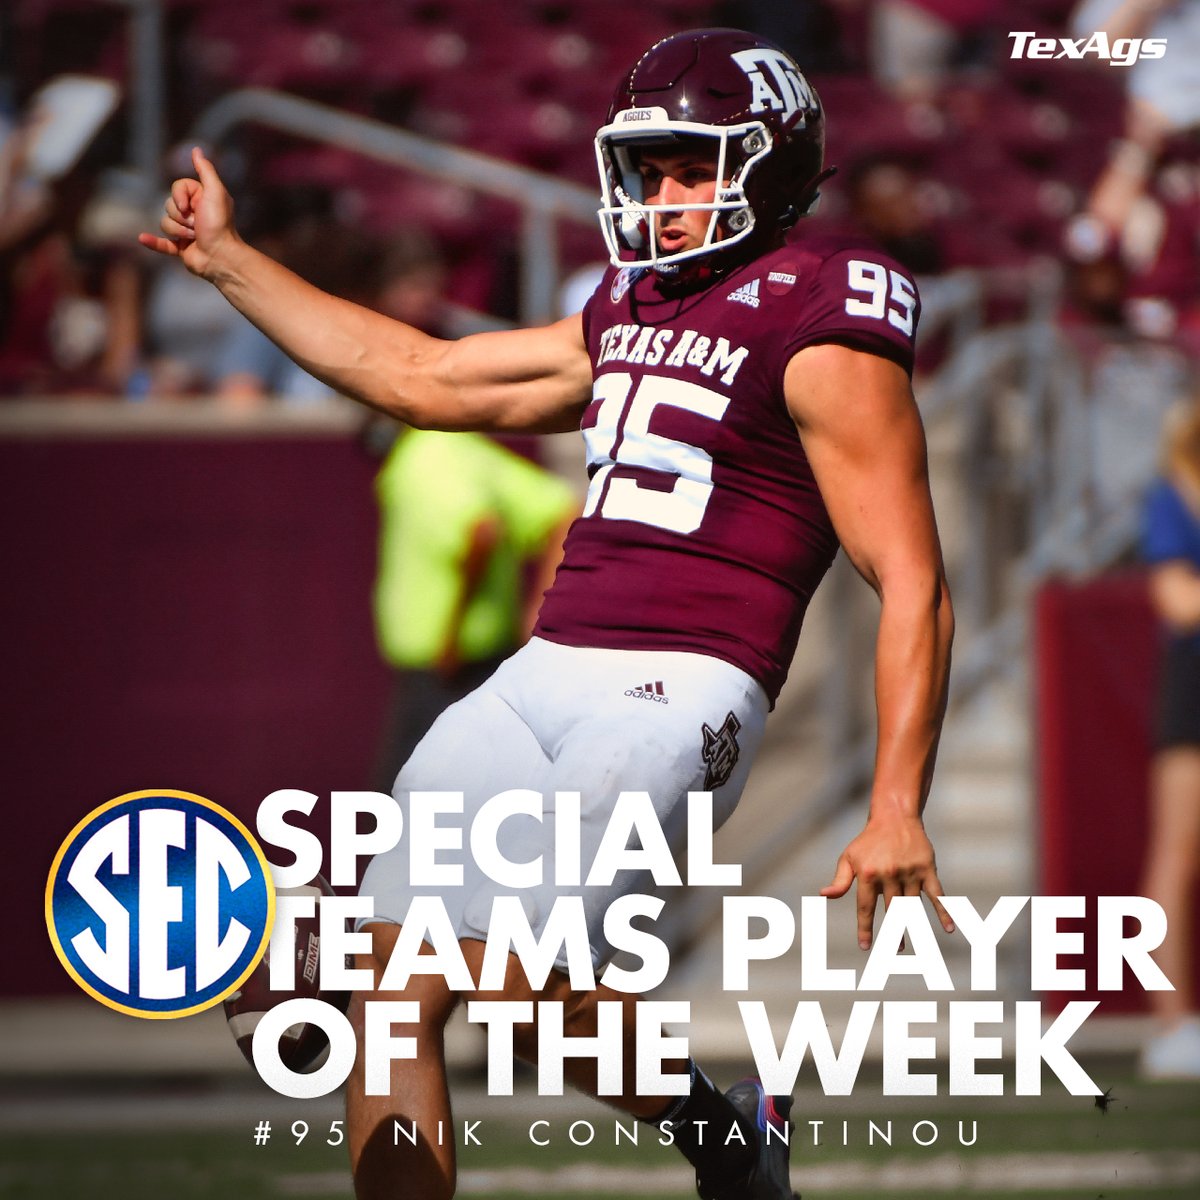 Your SEC Special Teams Player of the Week for his performance against New Mexico is @nikyc100 #GigEm